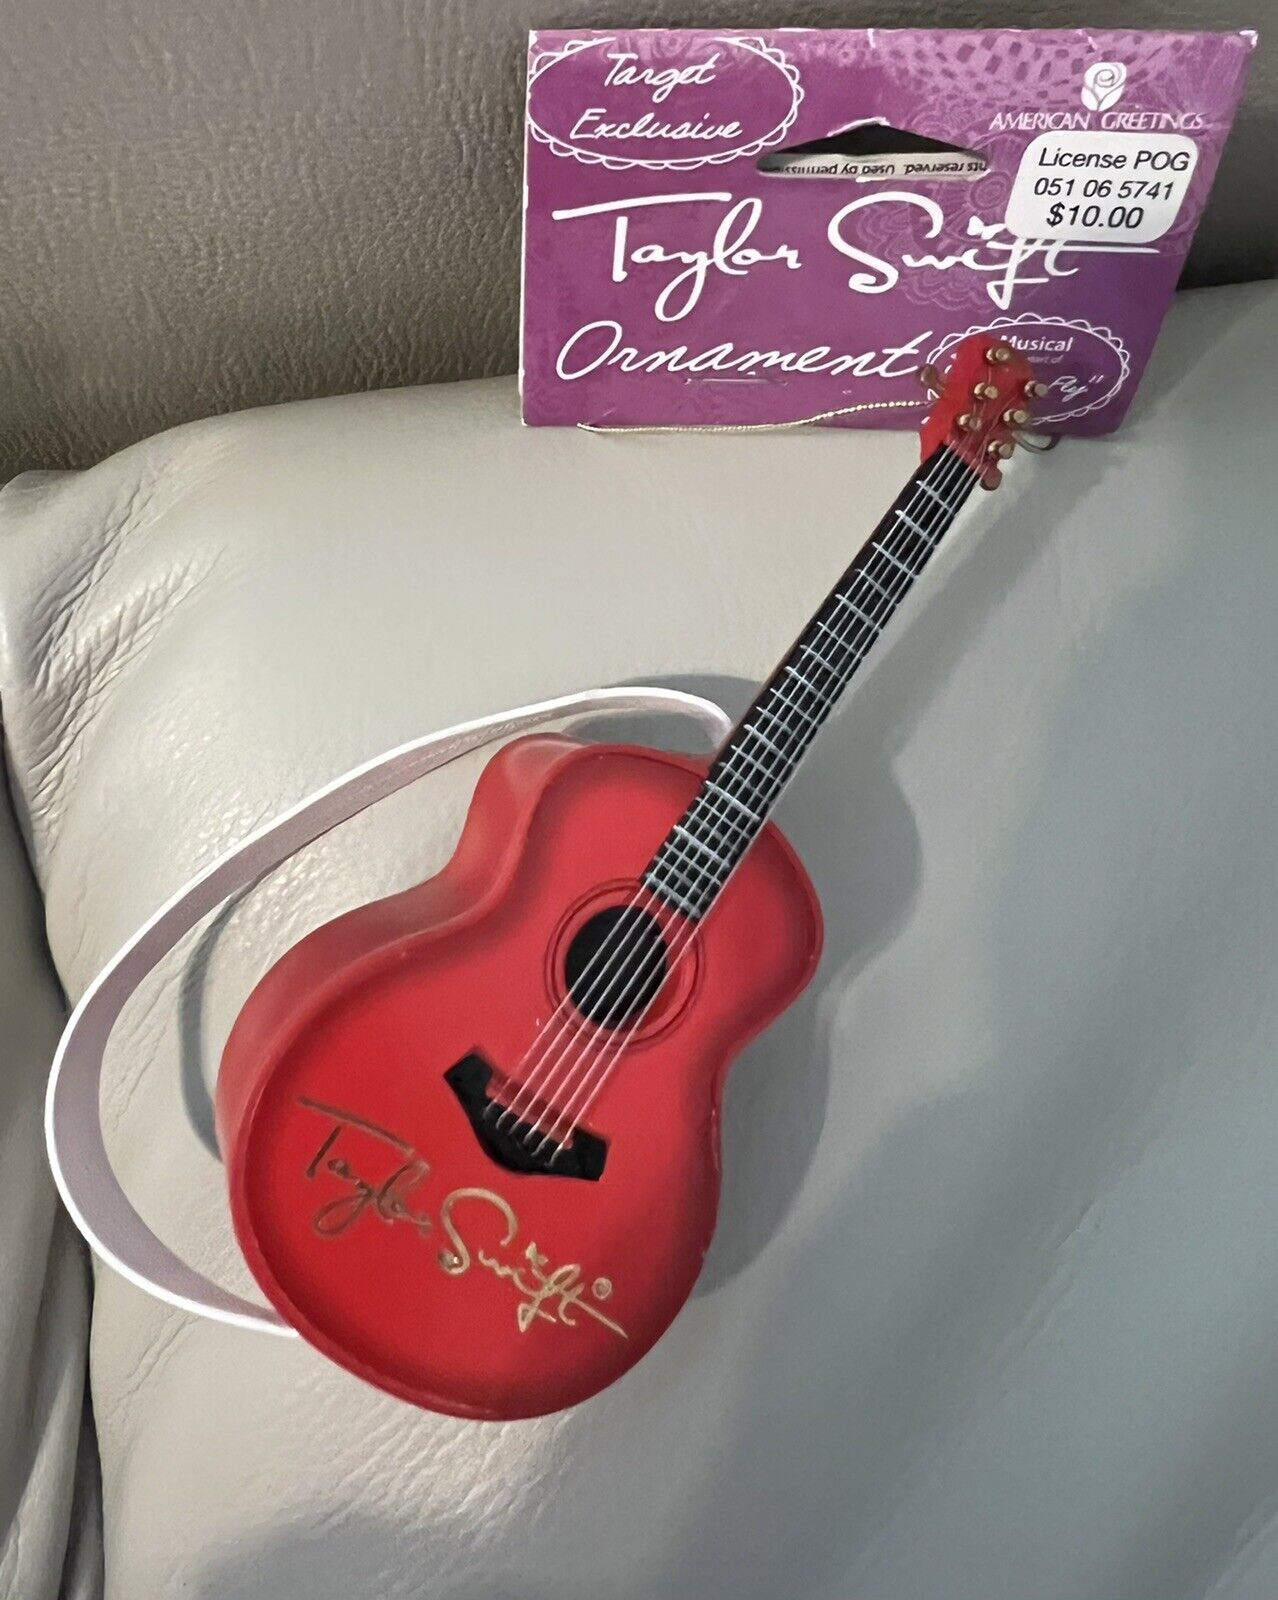 TAYLOR SWIFT Red MUSICAL Sparks Fly GUITAR ORNAMENT Target AMERICAN GREETING HTF